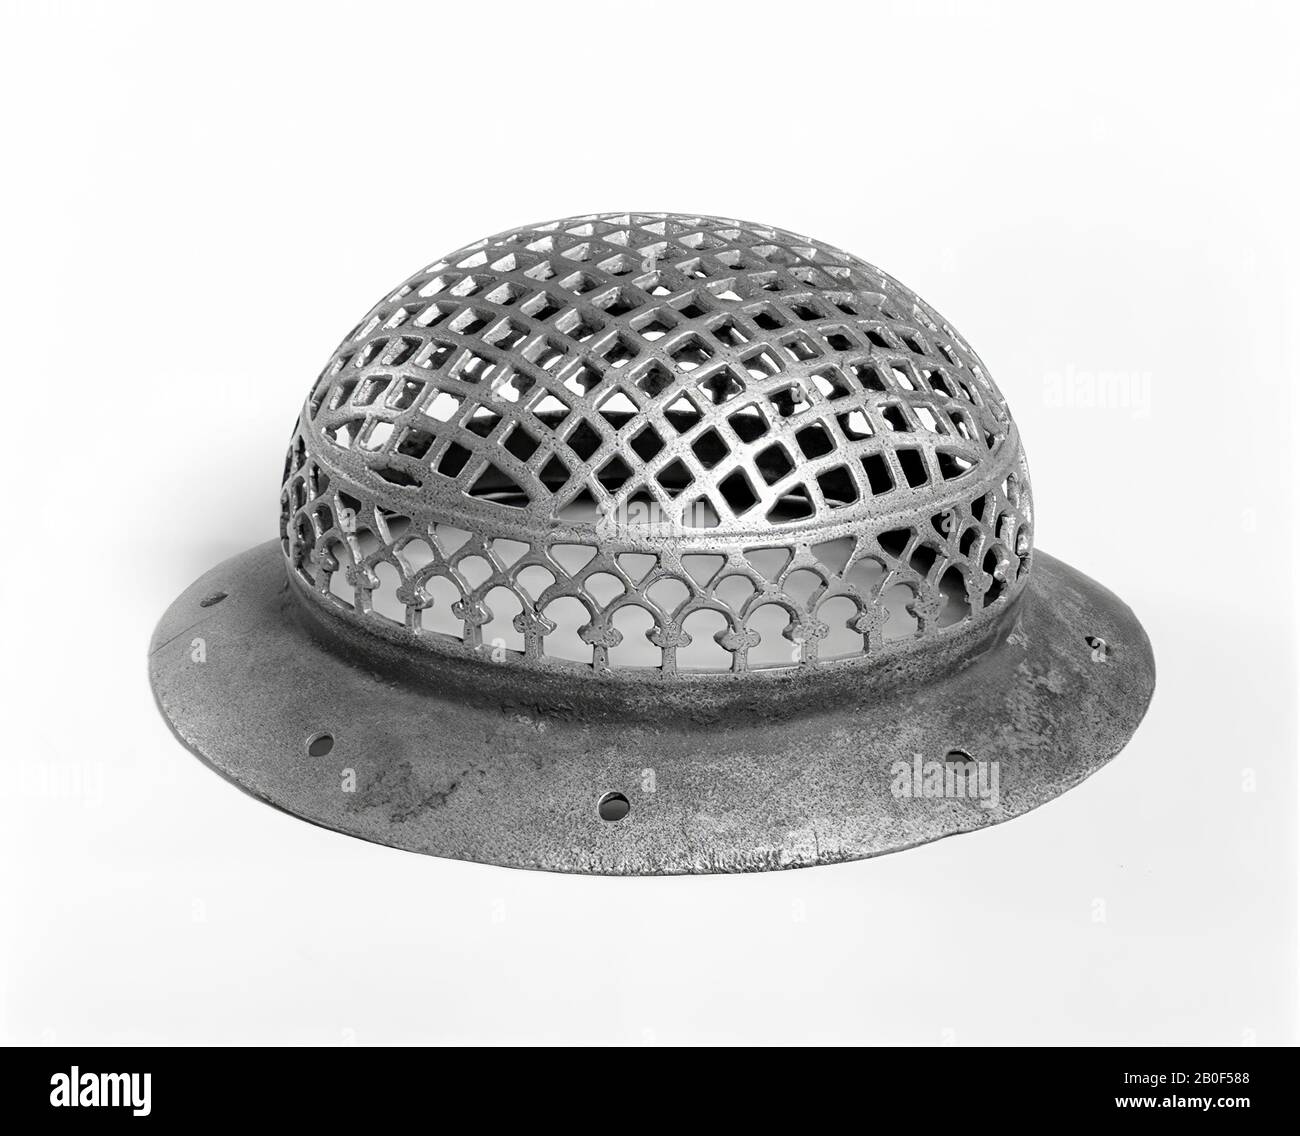 Bronze eye protector of a horse. On a conical bottle rim with 8 perforations, a hemisphere completely cut out into grilles. From below, successively: arcs on small columns, at the top of which to both sides a bulge, triangles. Then a relatively wide, circular ring with a central quarry. Above it, filling the entire convex part, a grille, created by looking at windows. Our ex. was possible part of a leather horse harness., cap, horse eye protection, metal, bronze, height: 6,5 cm, roman 1-300 AD, Netherlands, North Brabant, Oss, Lith, Maas Stock Photo